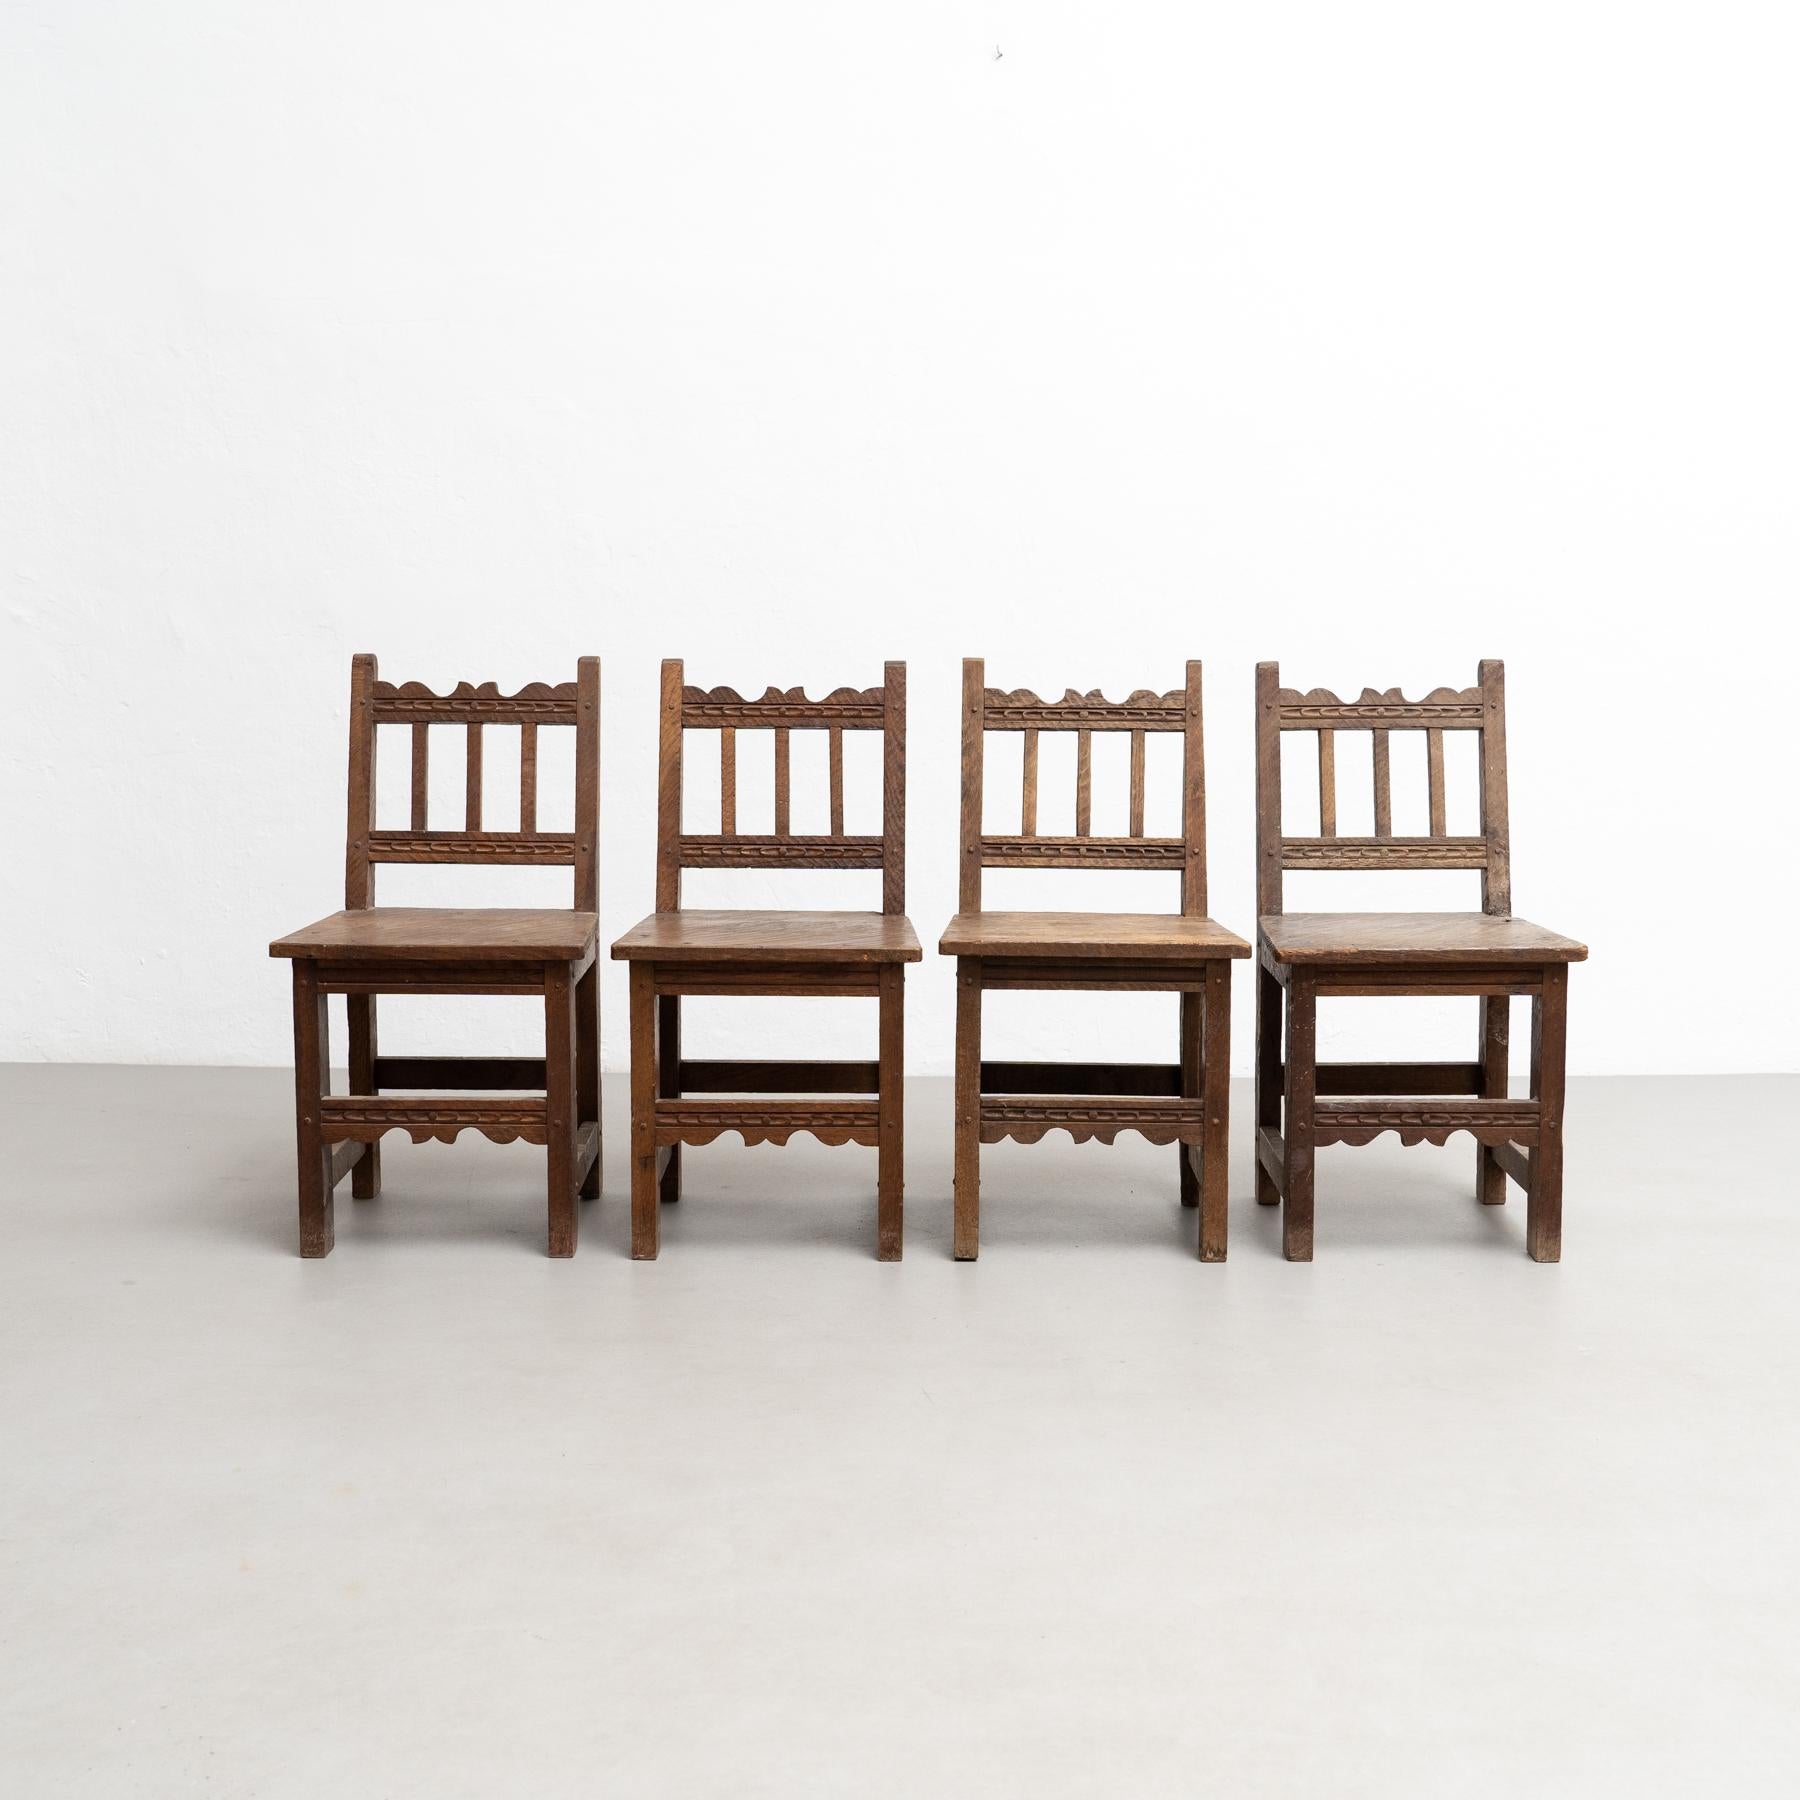 French Set of Four Mid-Century Modern Rationalist Wood Chairs, Rustic Charm, circa 1940